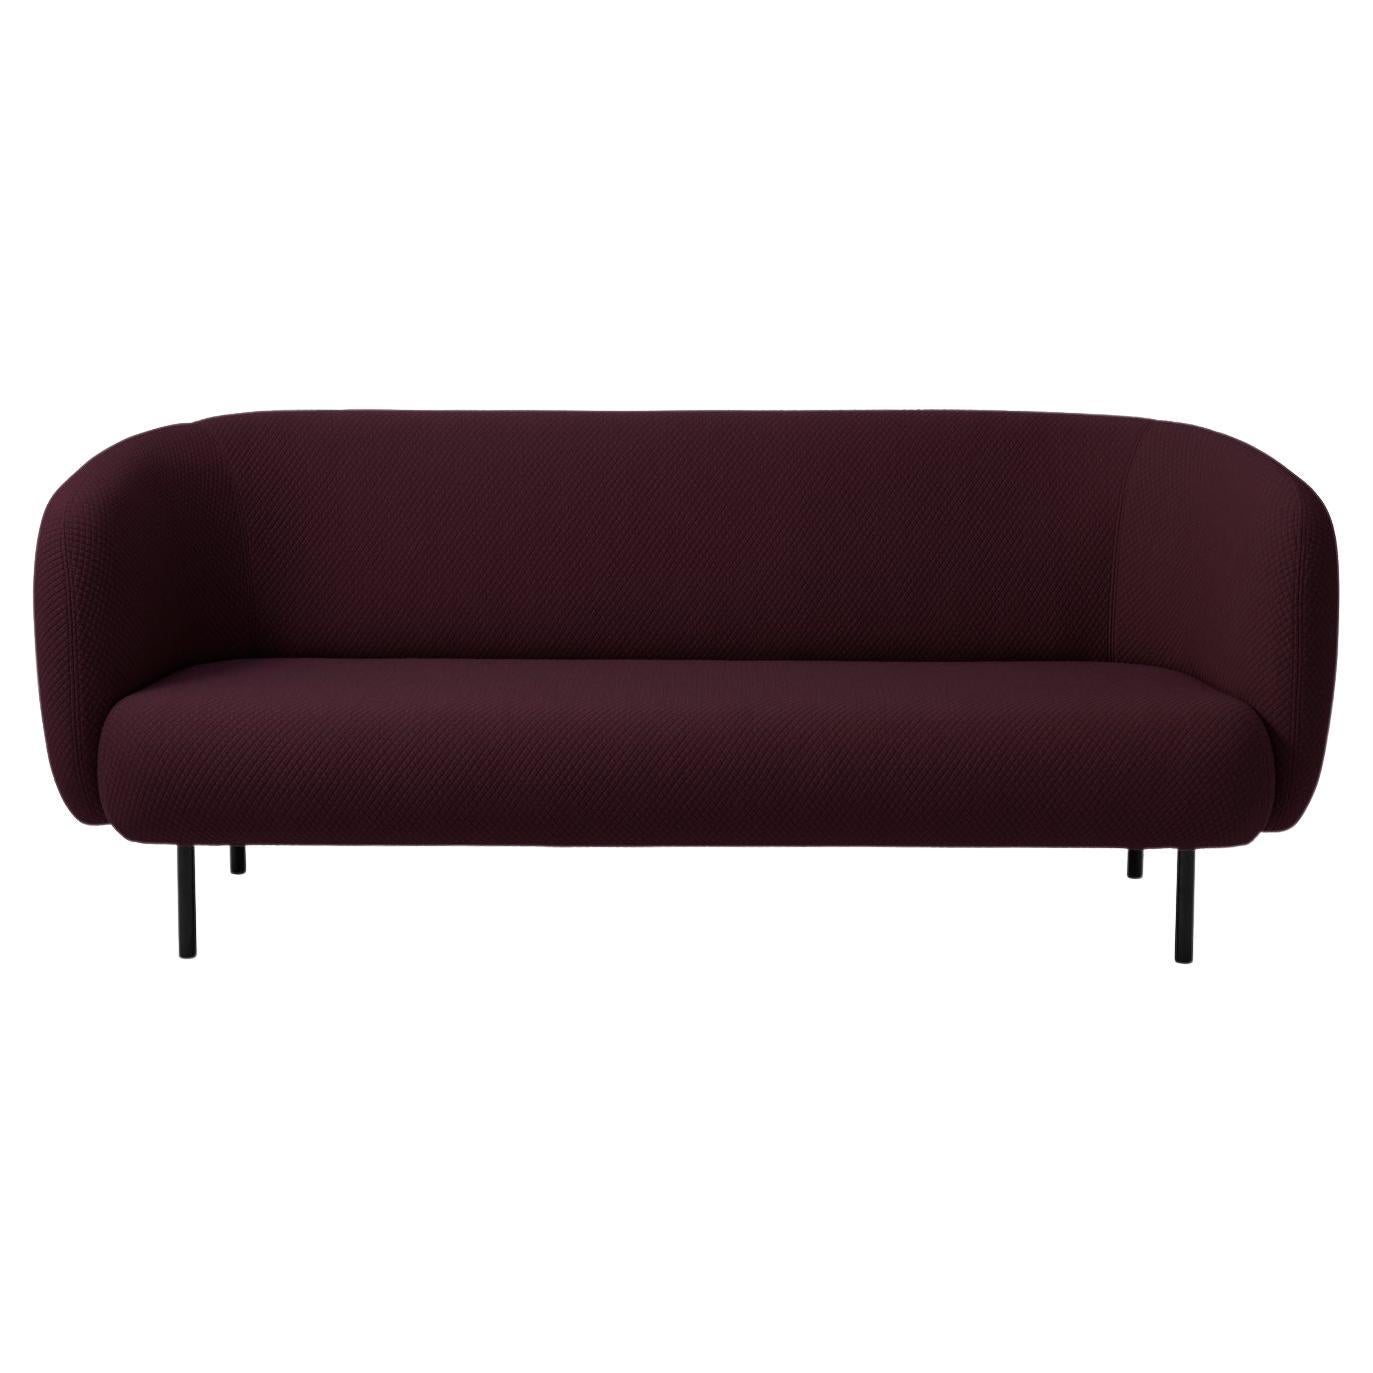 Caper 3 Seater Mosaic Dark Bordeaux by Warm Nordic For Sale